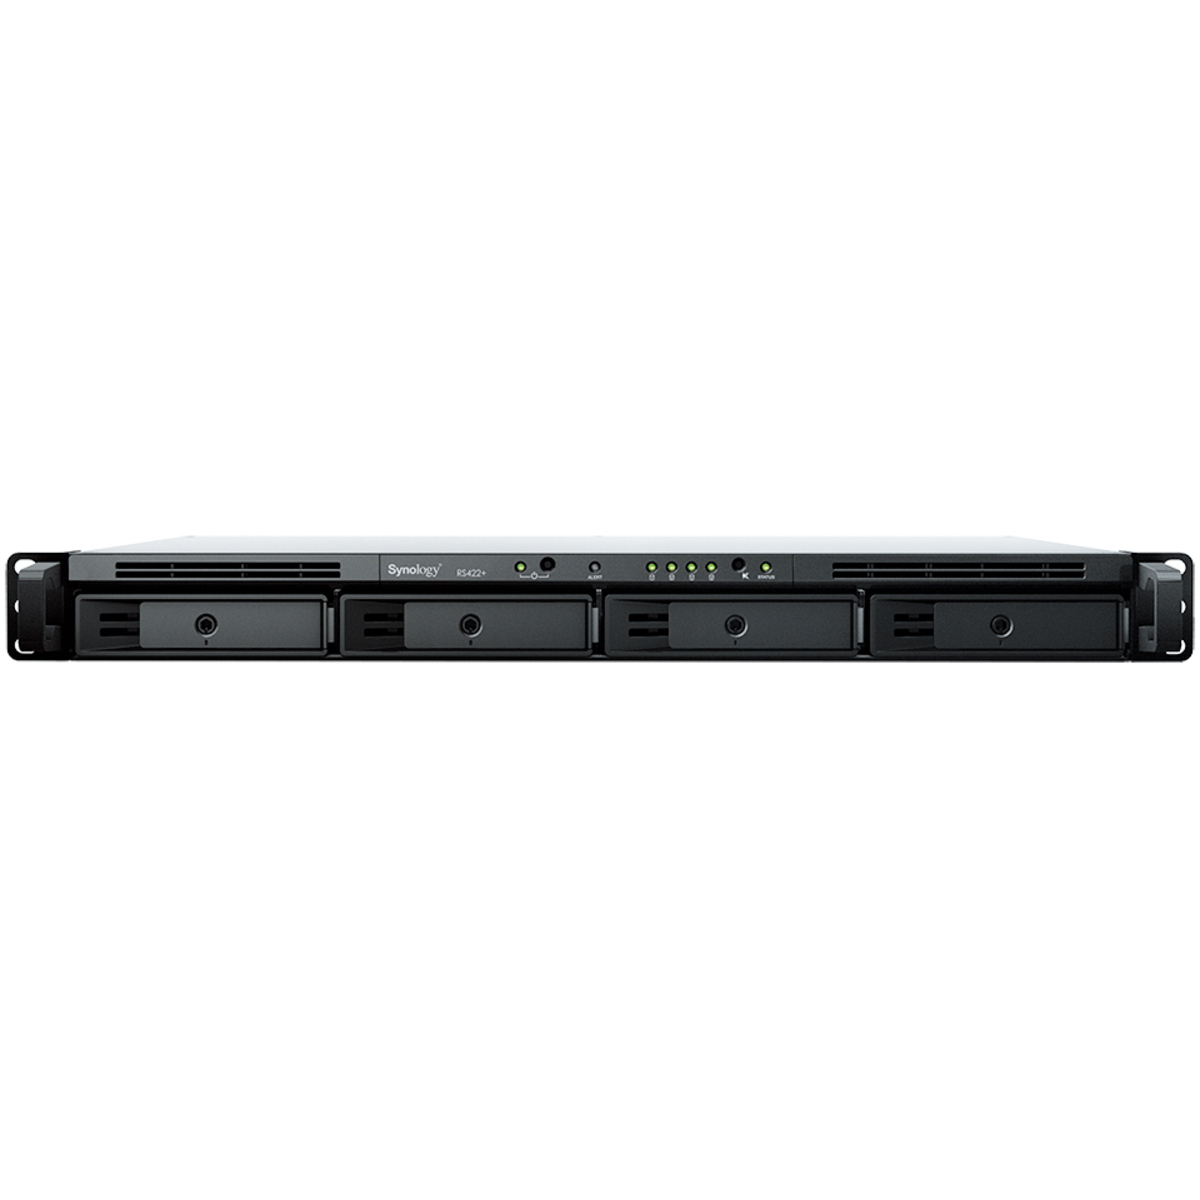 Synology RackStation RS422+ 24tb 4-Bay RackMount Personal / Basic Home / Small Office NAS - Network Attached Storage Device 4x6tb Western Digital Red Plus WD60EFPX 3.5 5640rpm SATA 6Gb/s HDD NAS Class Drives Installed - Burn-In Tested RackStation RS422+